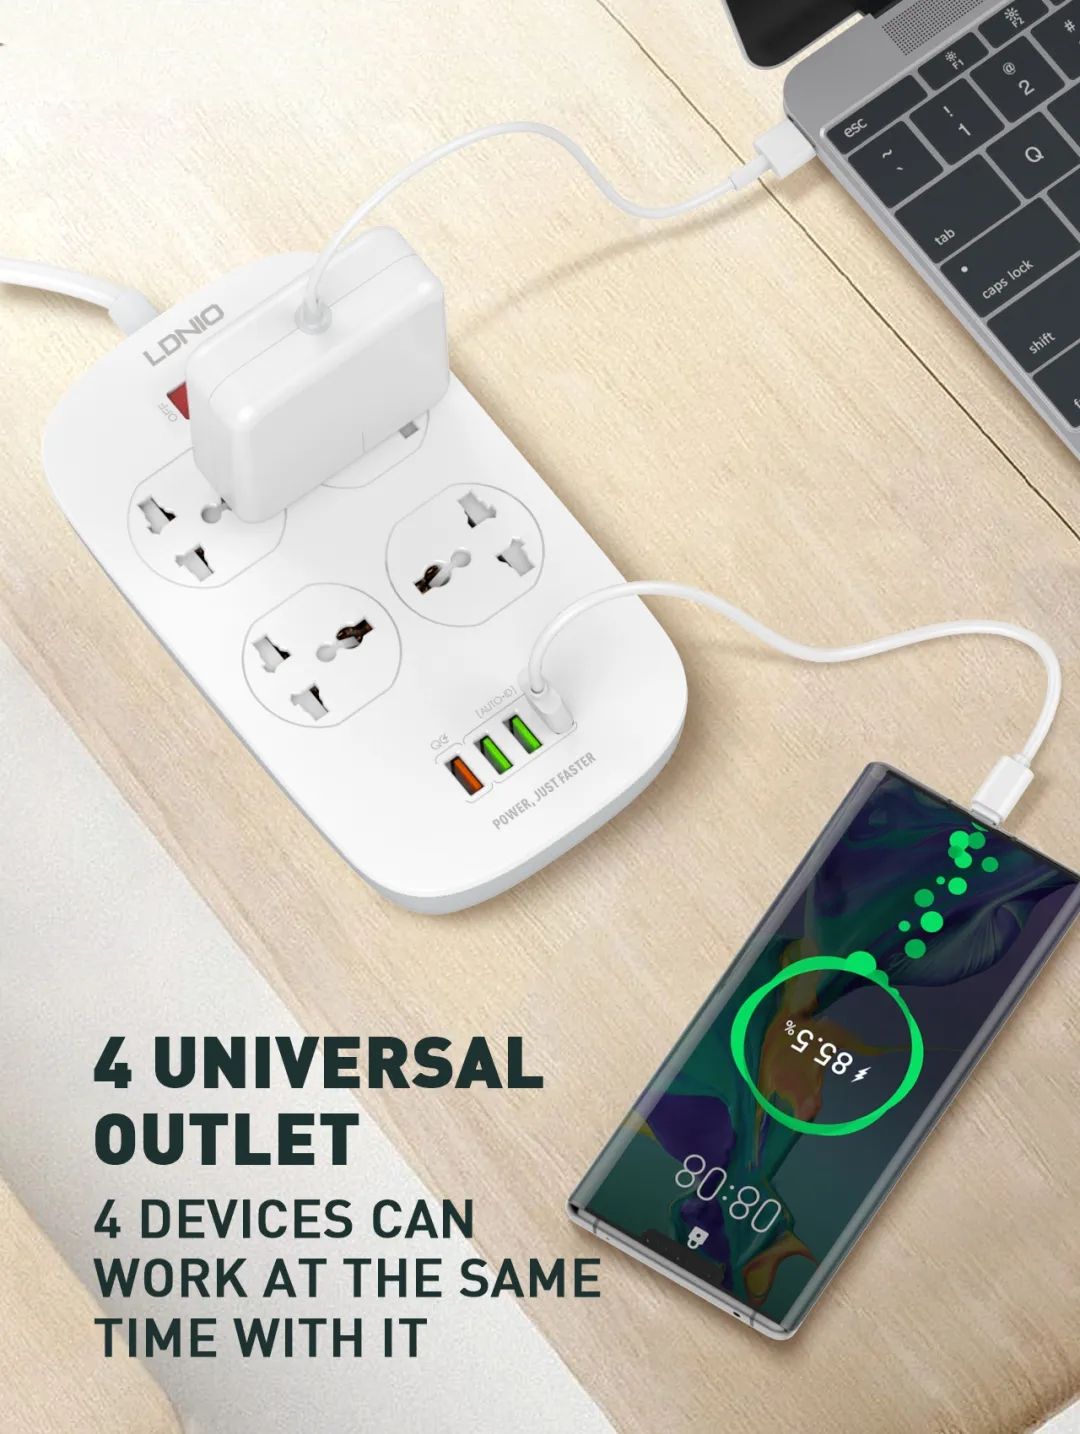 LDNIO-2500W-10A-Power-Strip-Socket-4-Universal-Outlets-4-USB-Ports-With-18W-QC30-Surge-Protector-66F-1710974